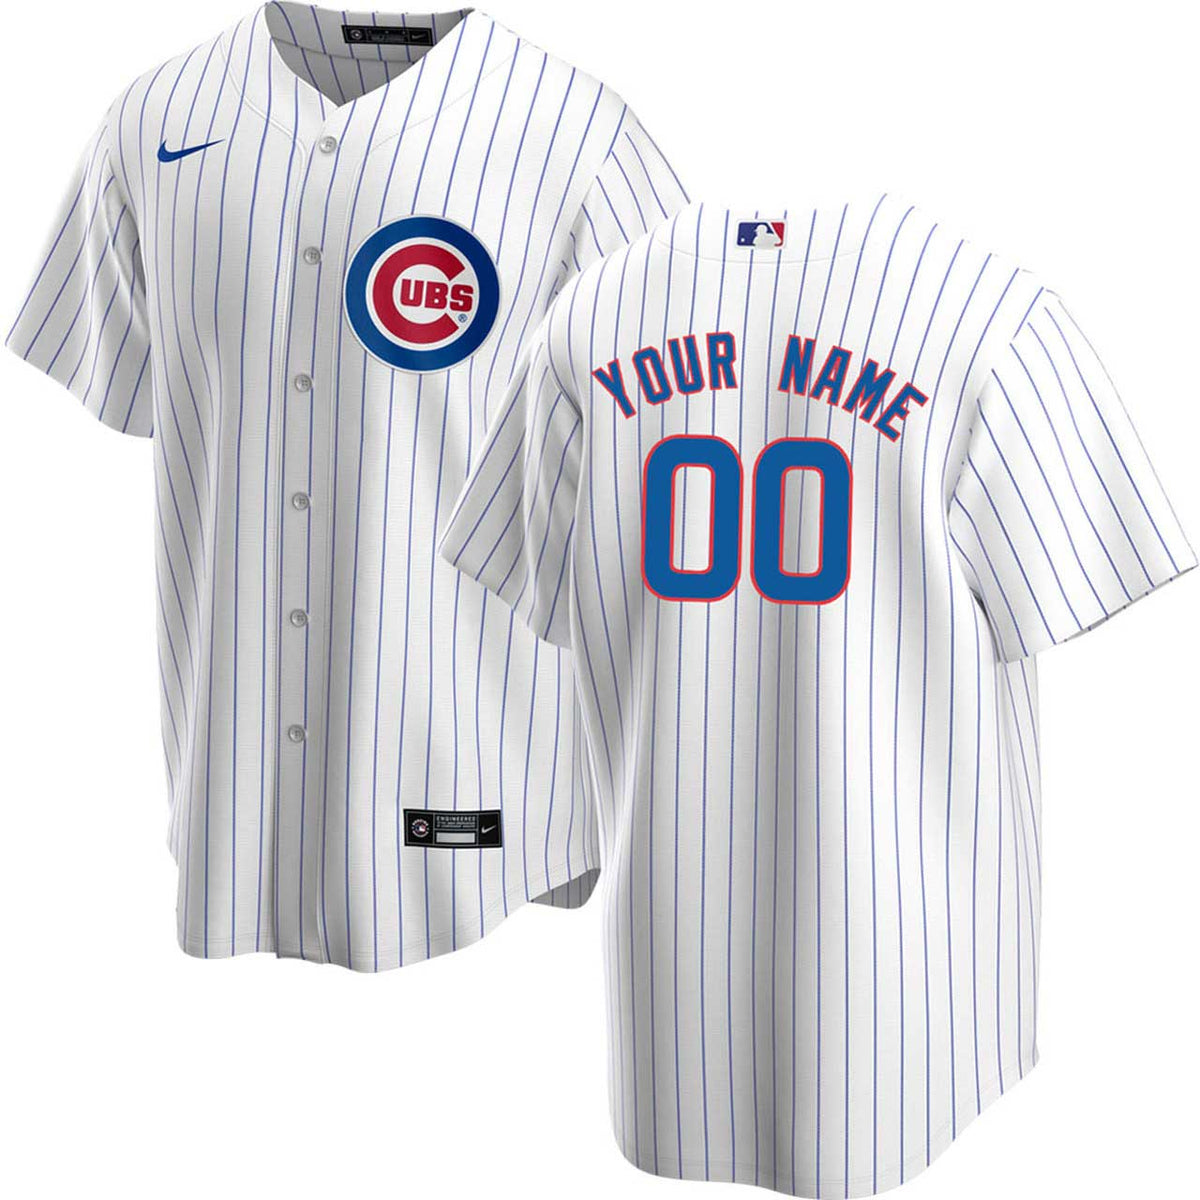 Chicago Cubs Special Hello Kitty Design Baseball Jersey Premium